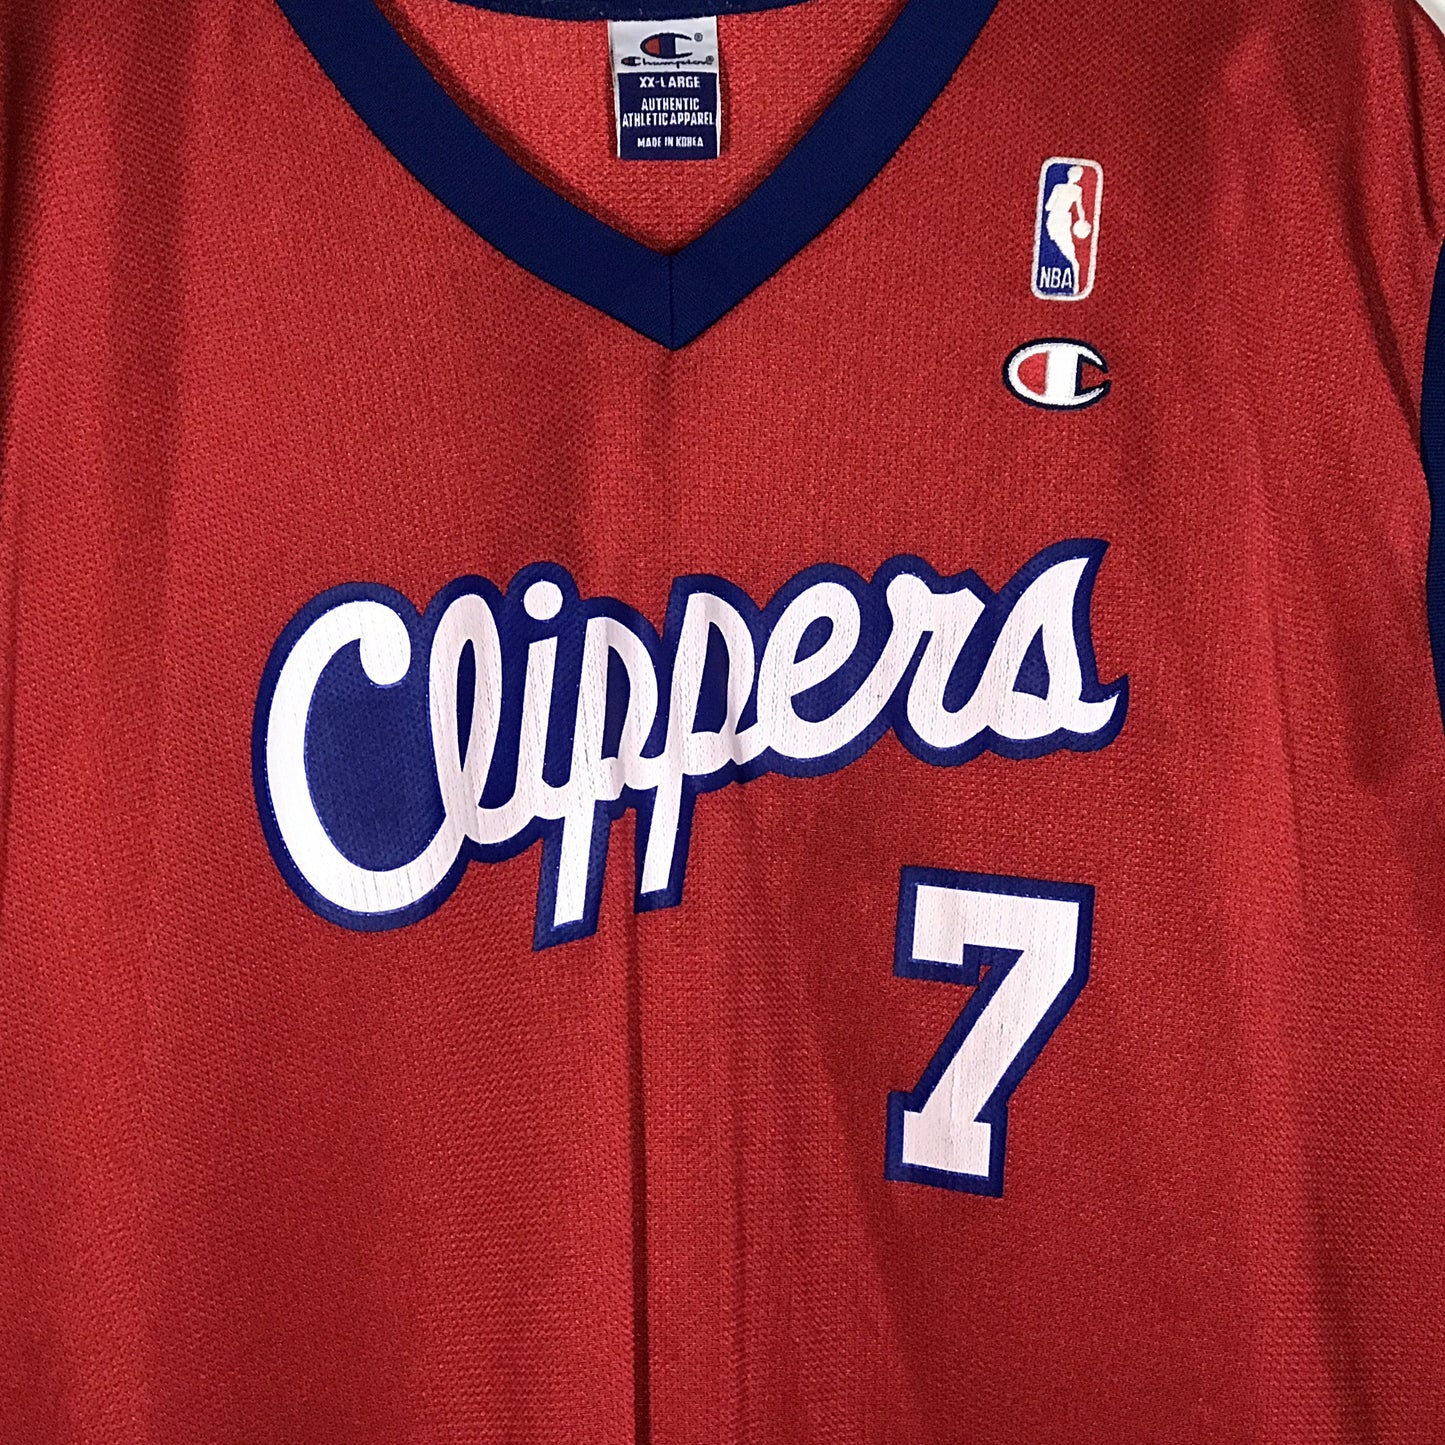 Maillot Lamar Odom Champion Los Angeles Clippers Taille 52 XXL